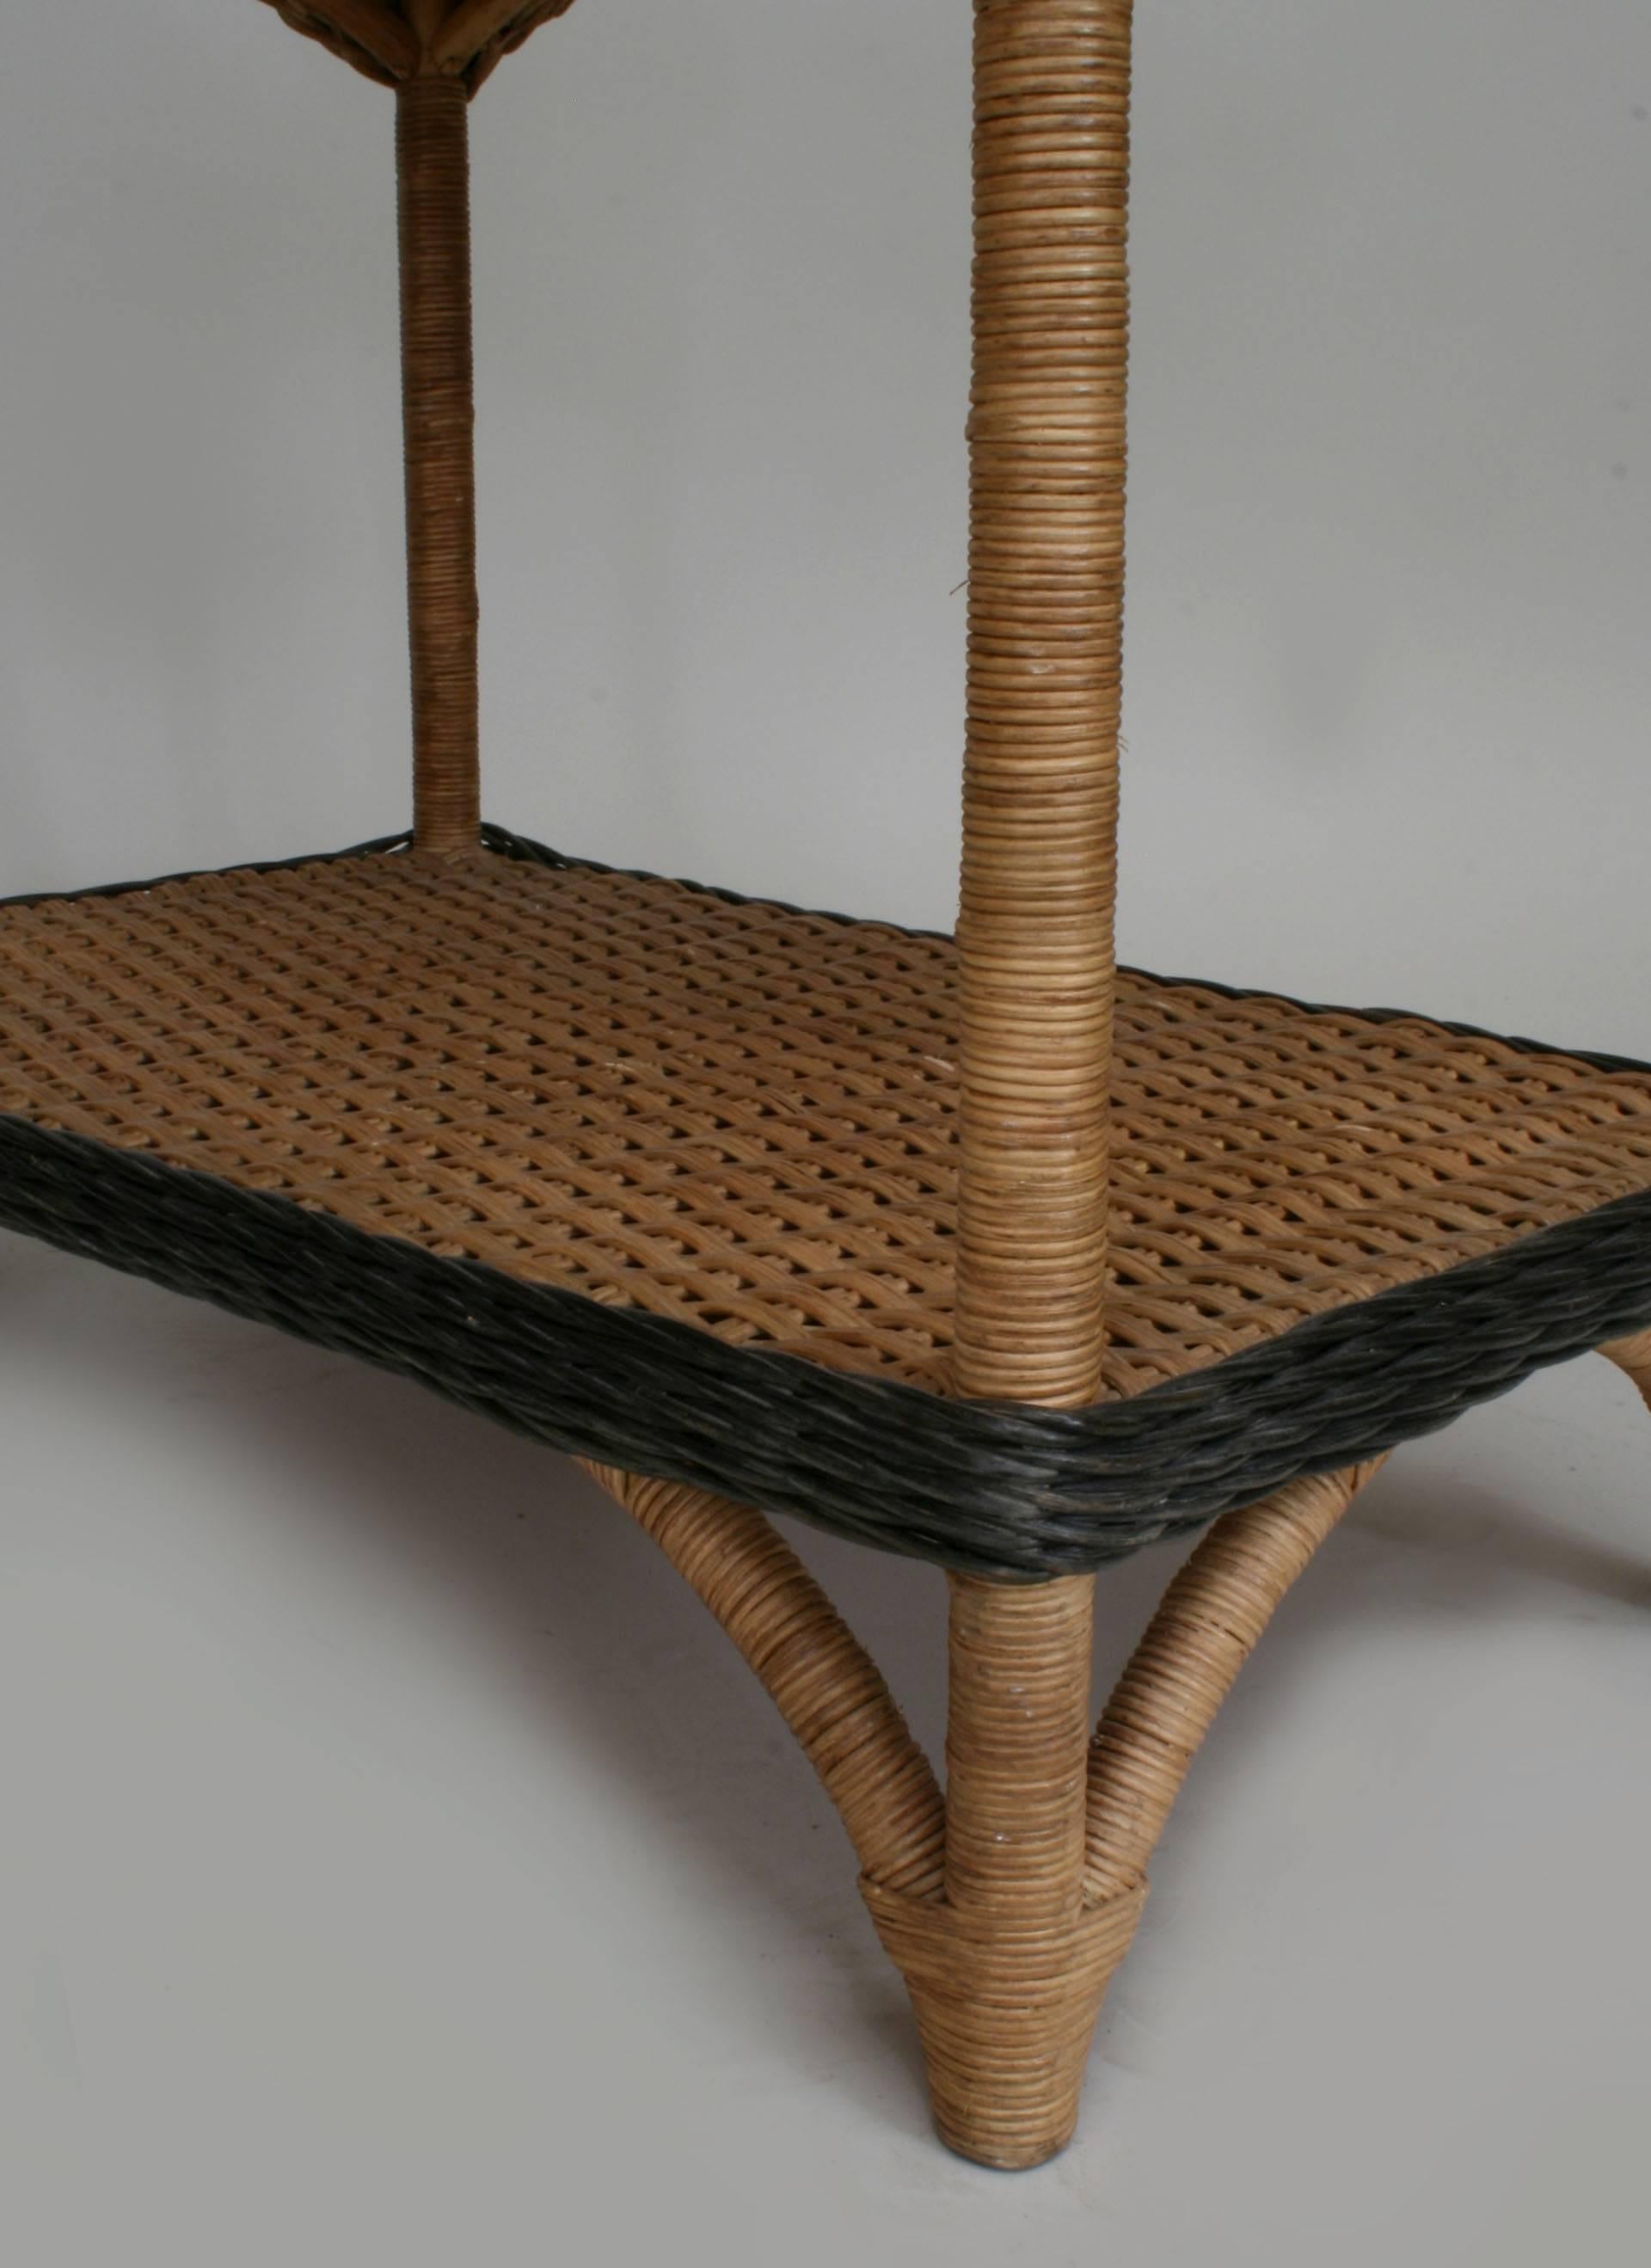 20th Century French, 1940s Natural Wicker Rectangular End Table